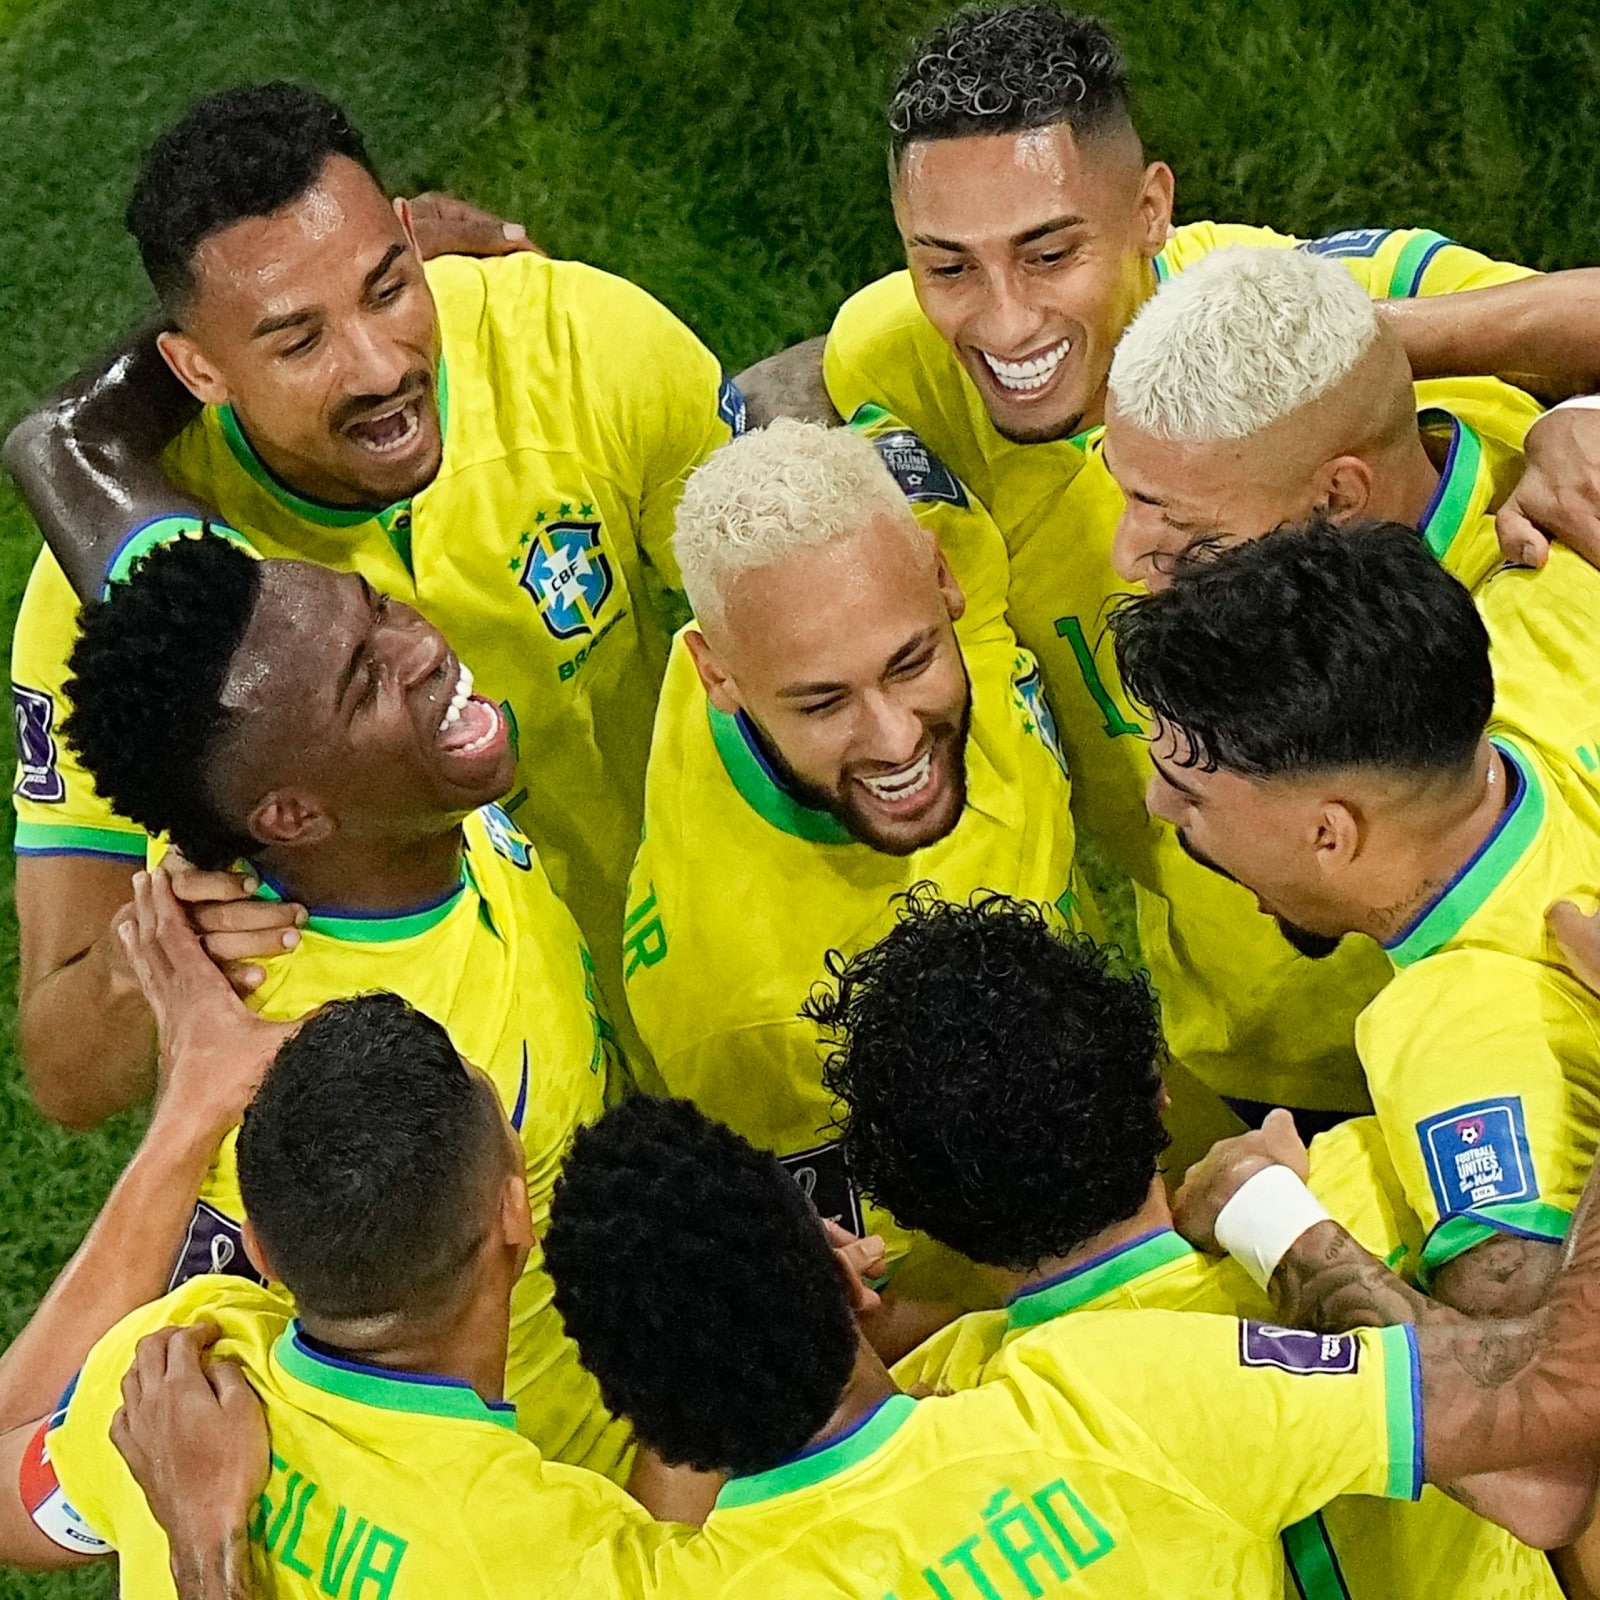 FIFA World Cup Group G Preview: Can Brazil Go All the Way?